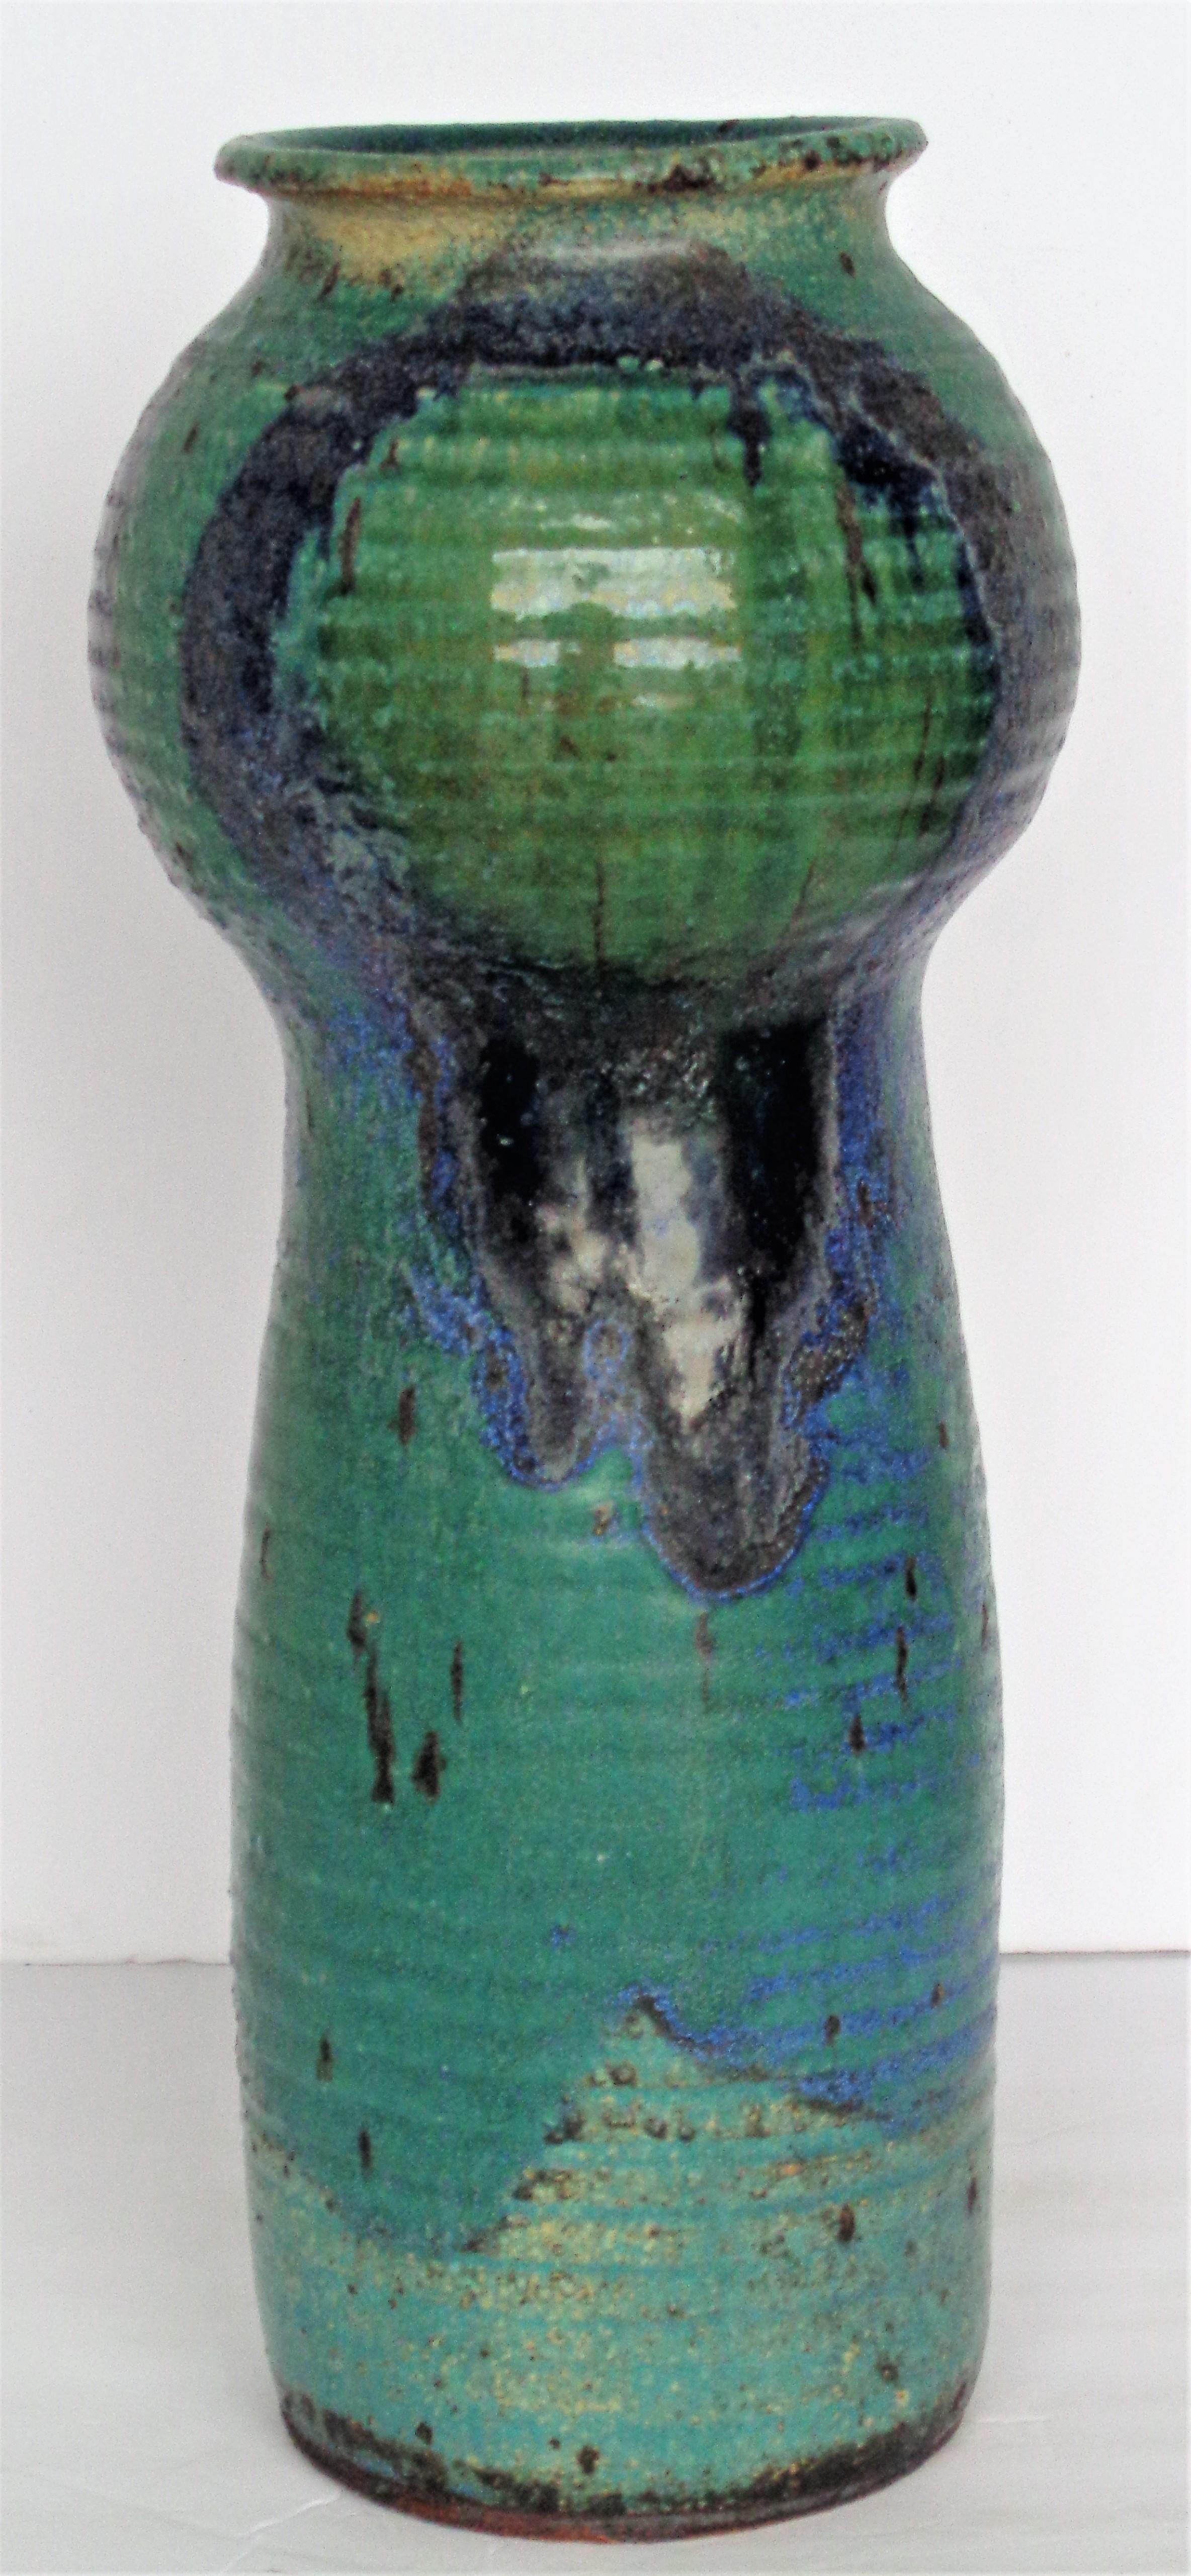 American studio craft art pottery tall sculptural vase with incredibly beautiful variegated blue green glazed textural surface by widely exhibited artist, potter - John P. Loree ( b 2031 - MFA Alfred University, Eastern Michigan University, Educator